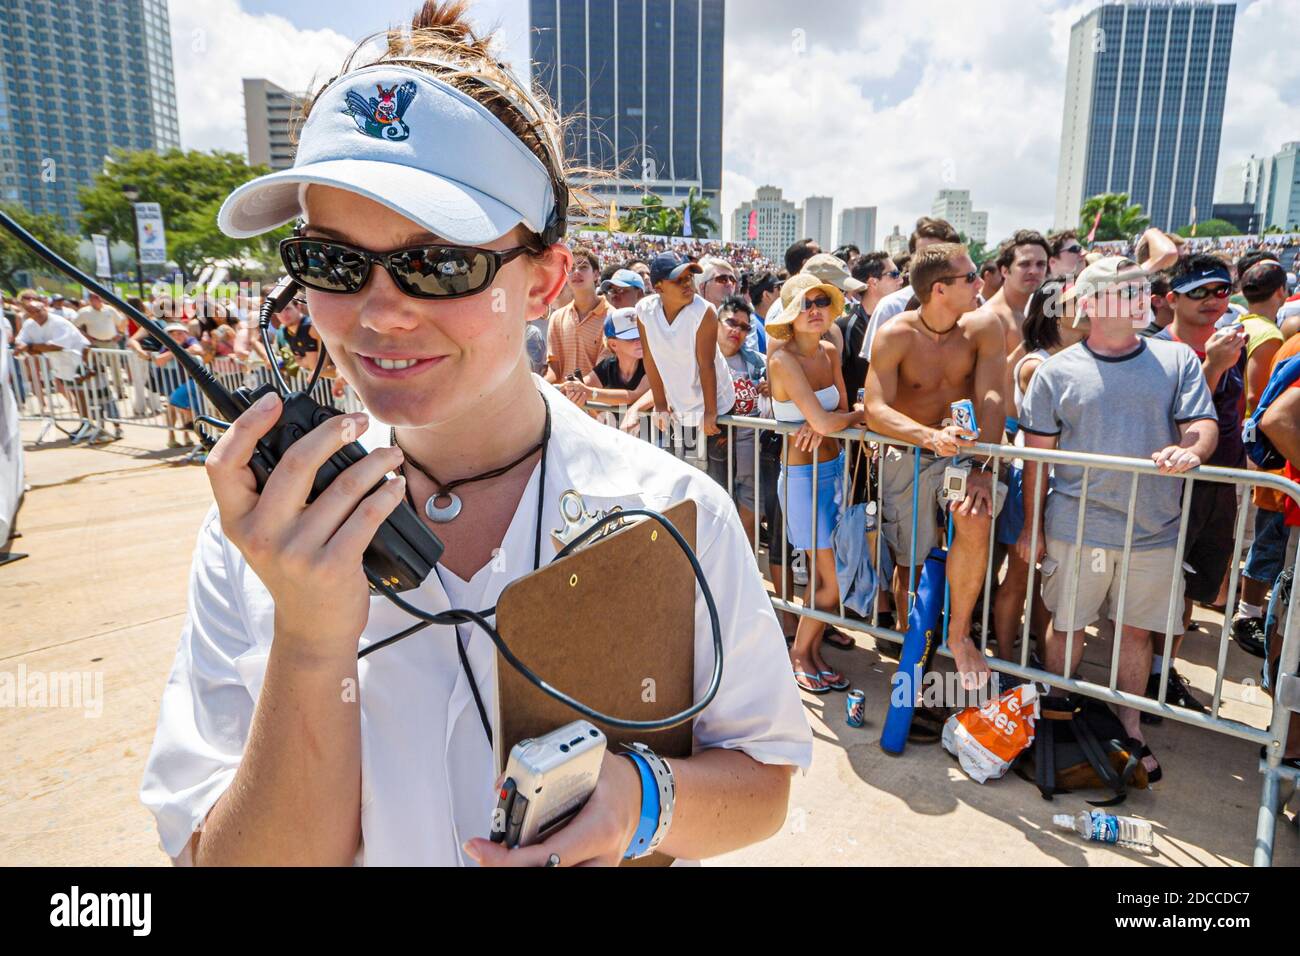 Miami Florida,Bayfront Park Red Bull Flugtag,festival event fair,flying contraptions competition,woman female staff communications using 2-way radio, Stock Photo